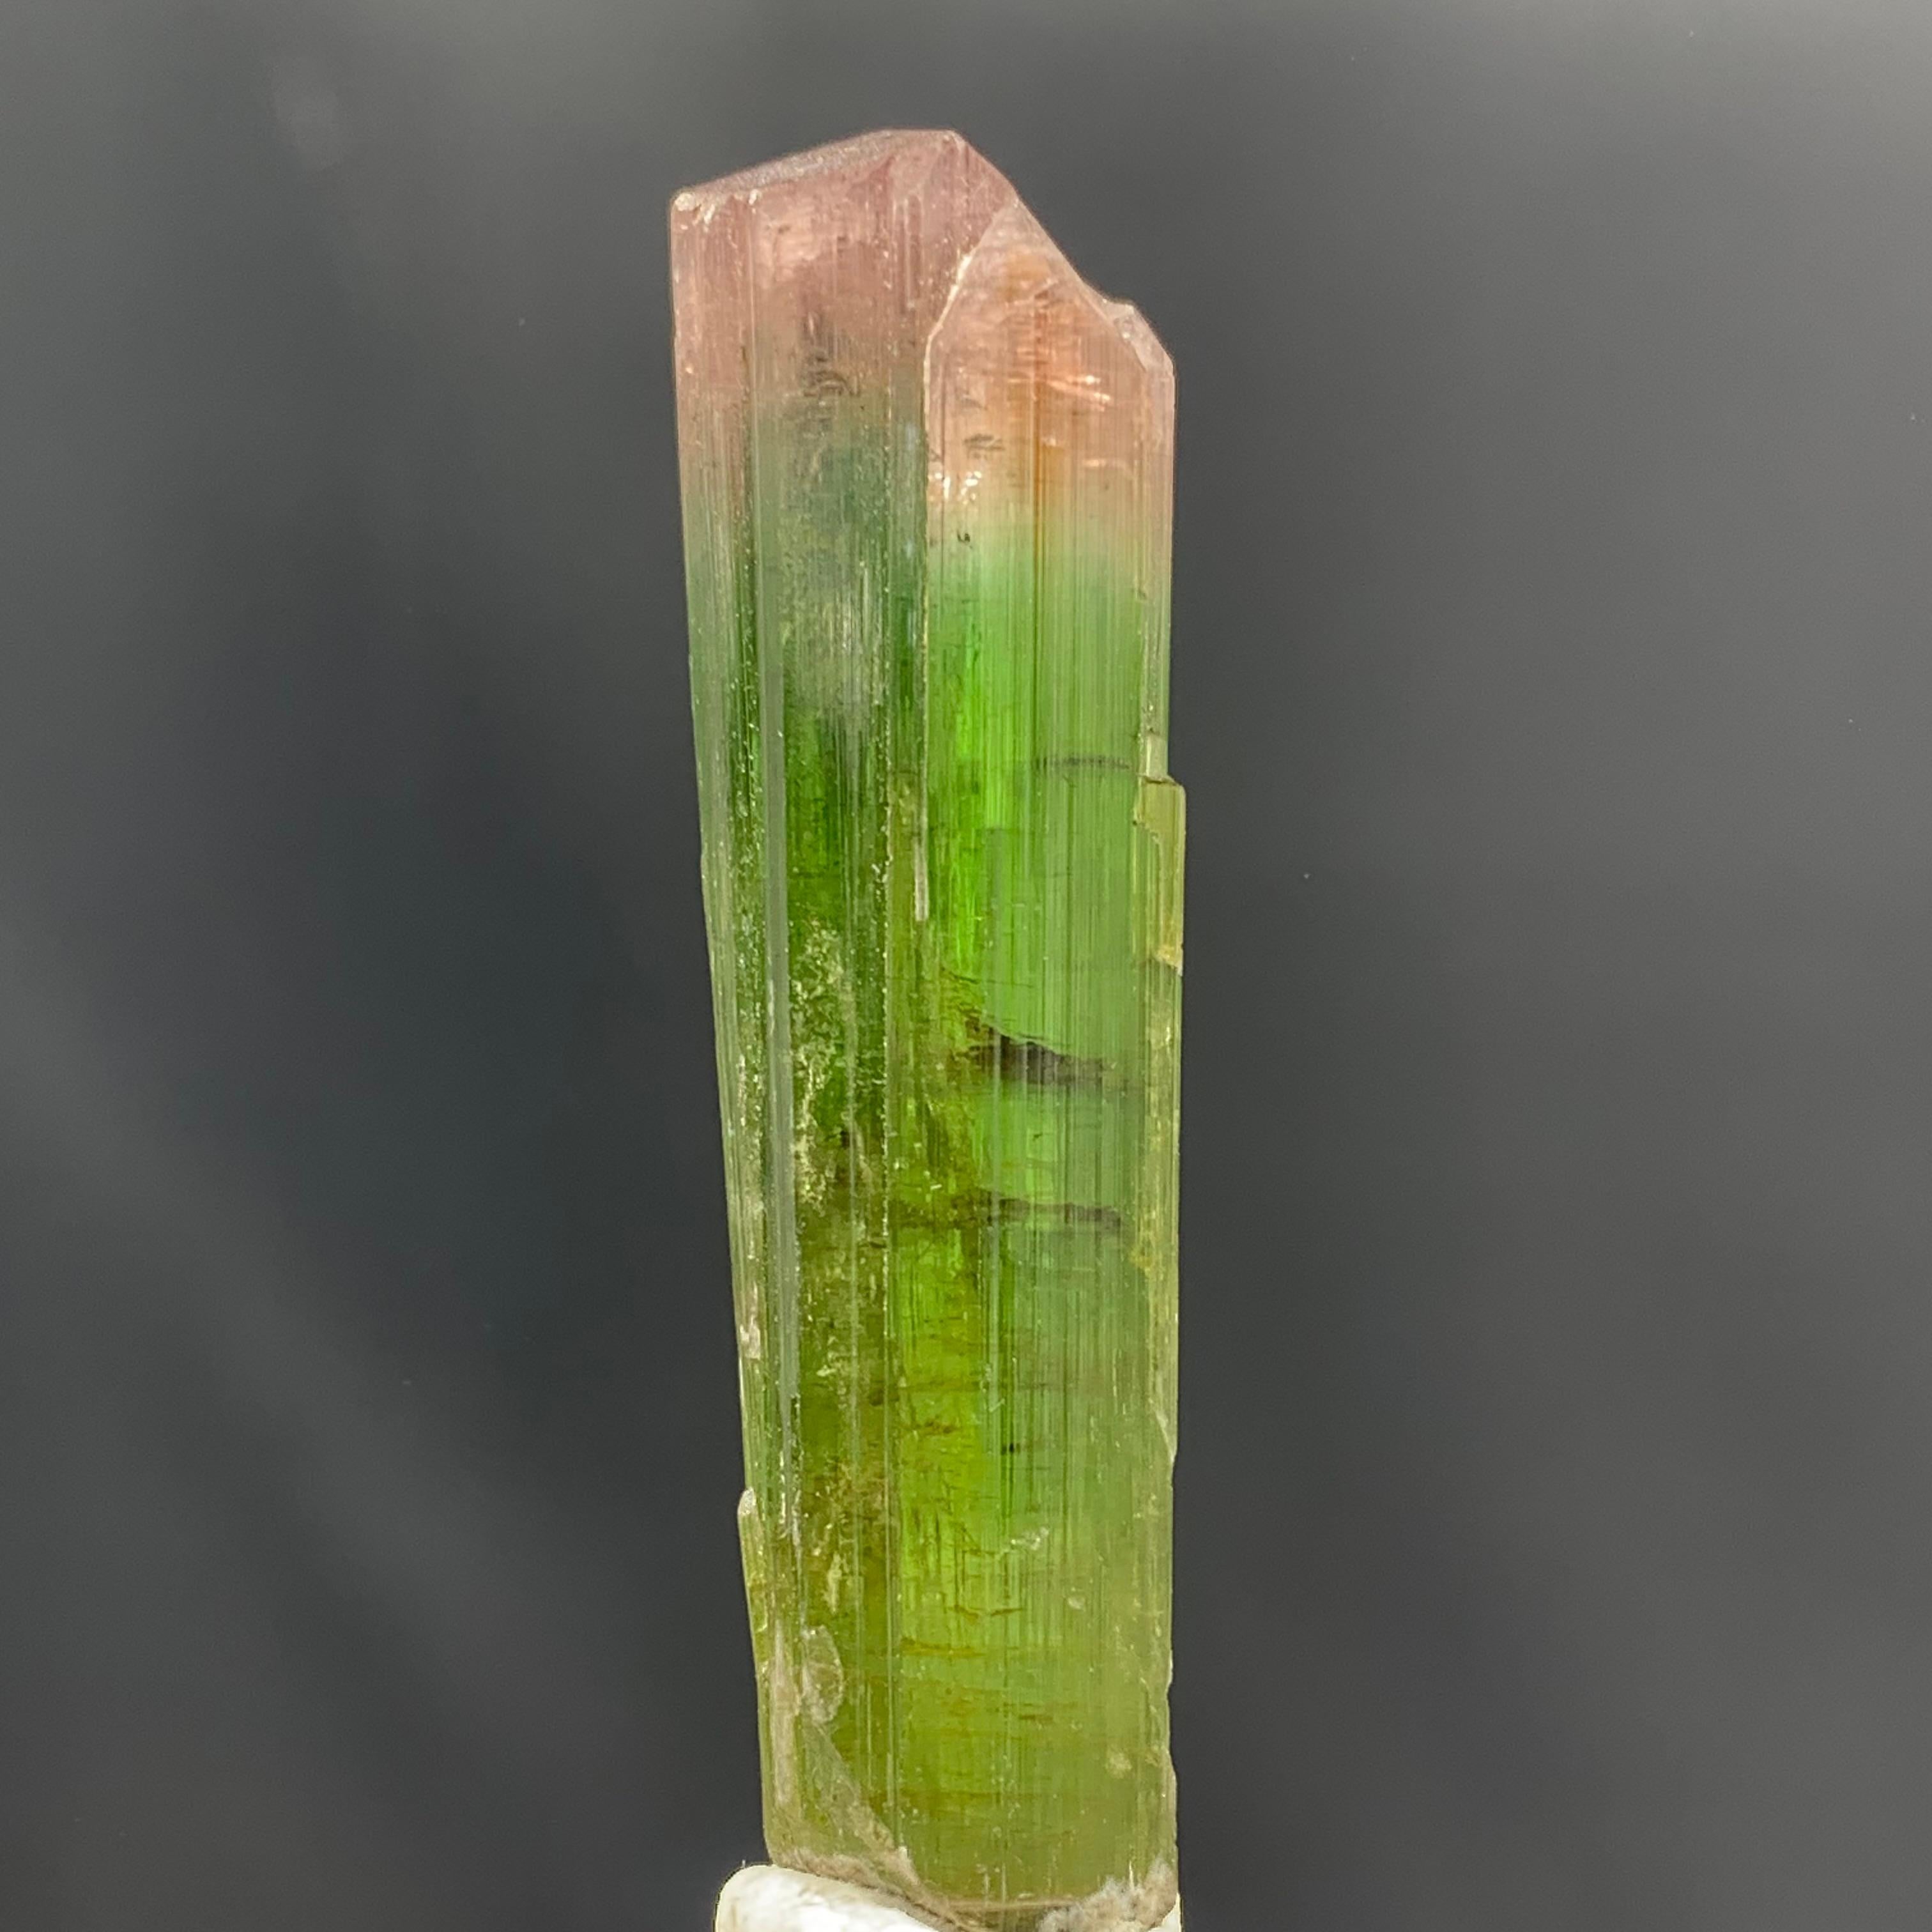 Other Glamorous Natural 69.75 Carat Bi Color Tourmaline Crystal From Afghanistan For Sale